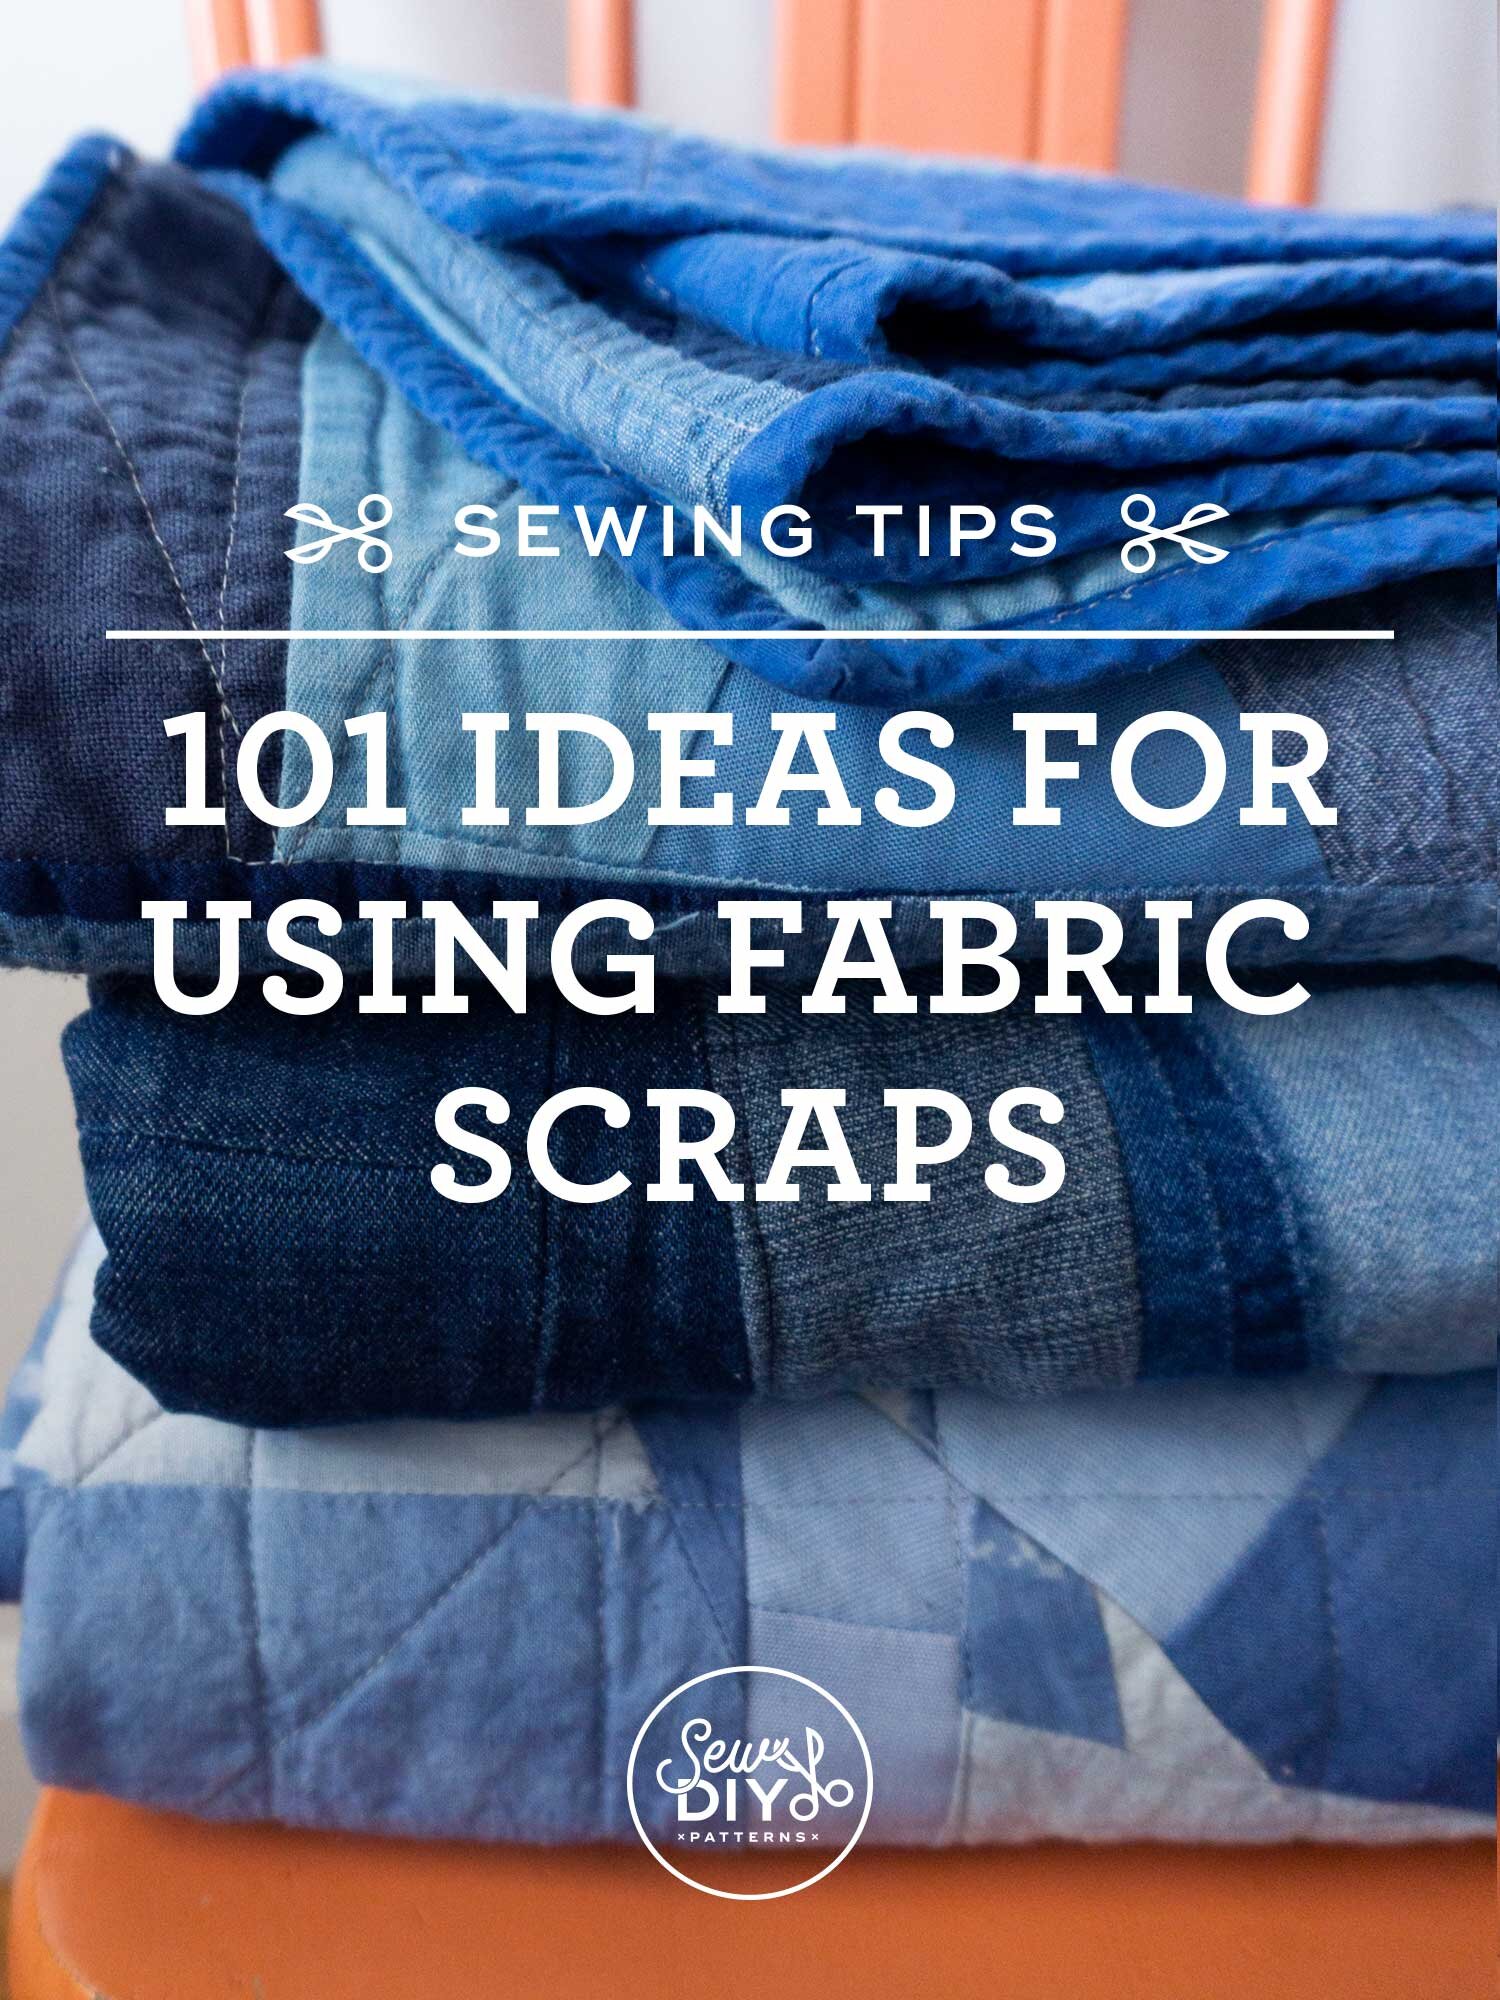 Fabric Scrap Crafts And Activities For Kids